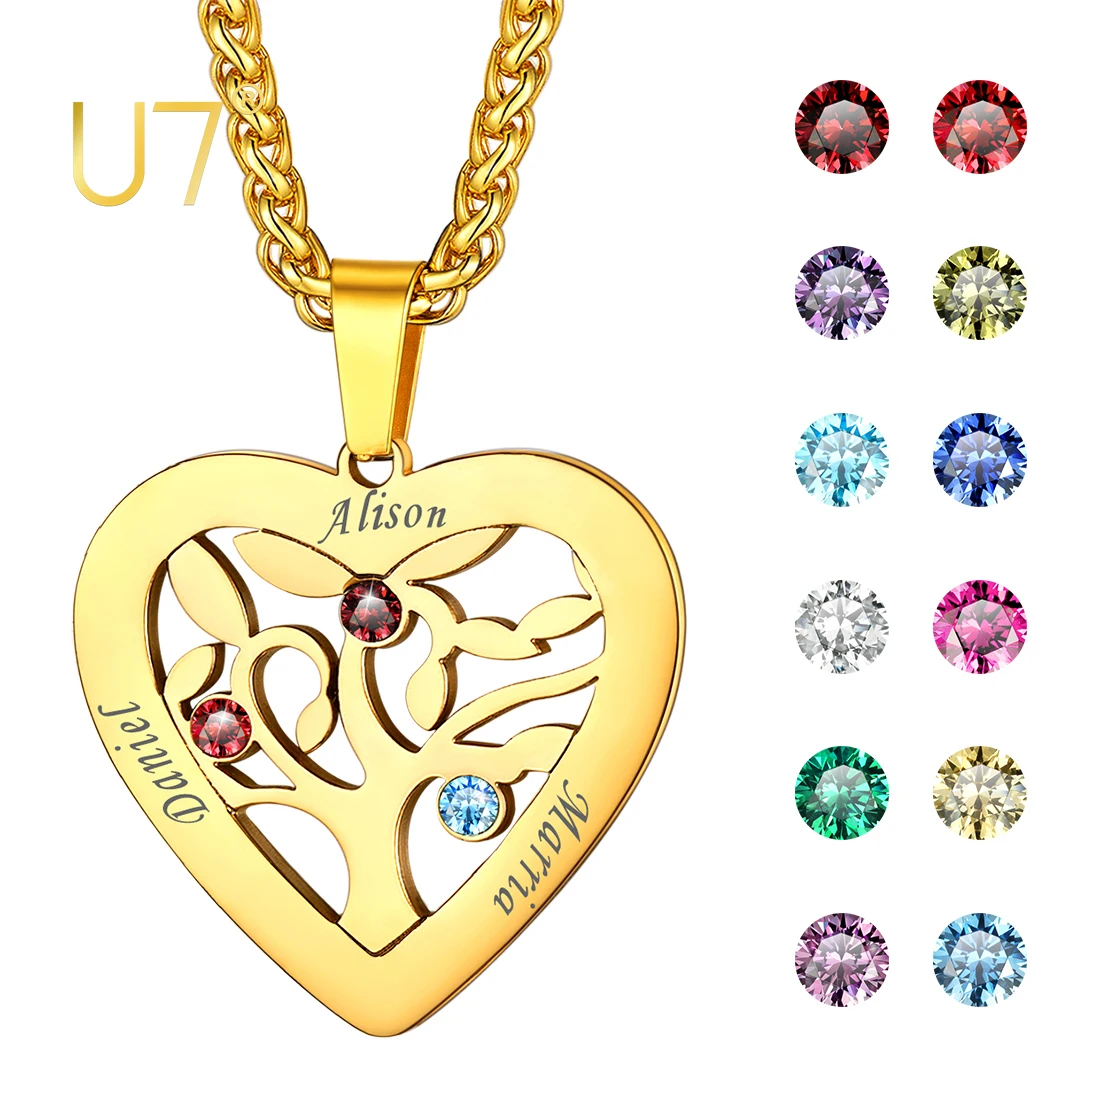 U7 Heart Pendant Necklace Personalized Engraved Stainless Steel Jewelry Friend Family Names Birthstone Gift for Women Girls bedroom diffuser electric humidifier gift for family friend new dropship